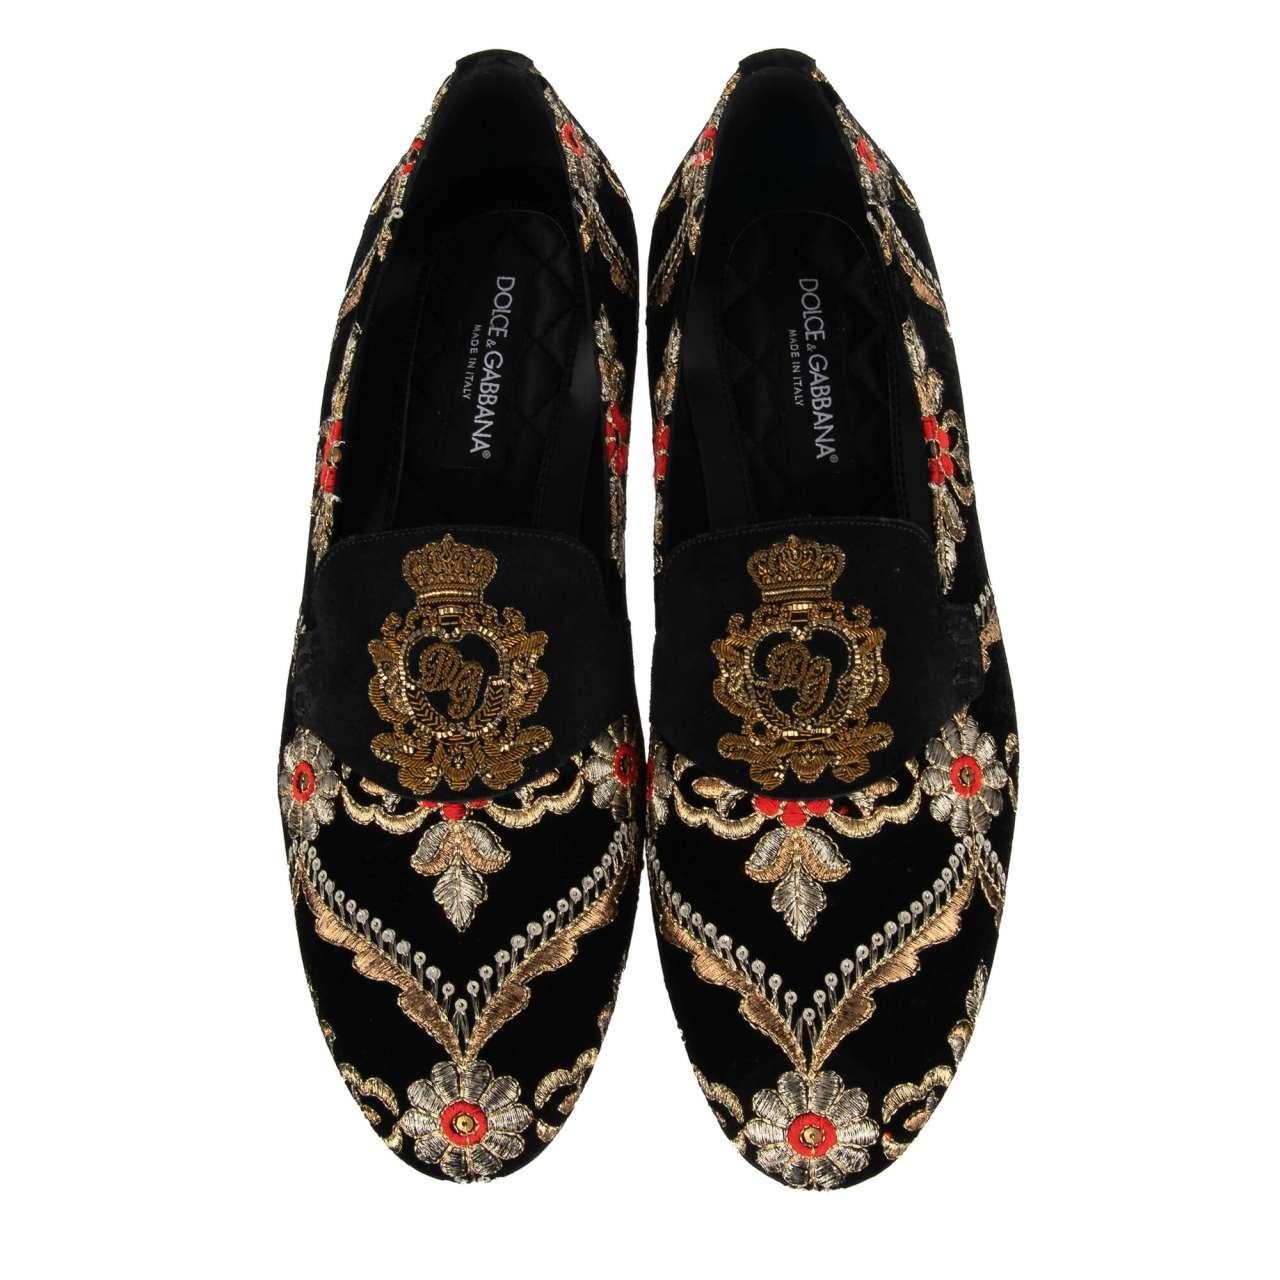 - Velvet loafer shoes VIVALDI with embroidered crown and DG logo and floral pattern in black, red and gold by DOLCE & GABBANA - MADE IN ITALY - New with Box - Model: A50218-AU479-8G900 - Material: 35% Cotton, 35% Polyethylene, 30% Calfskin - Sole: